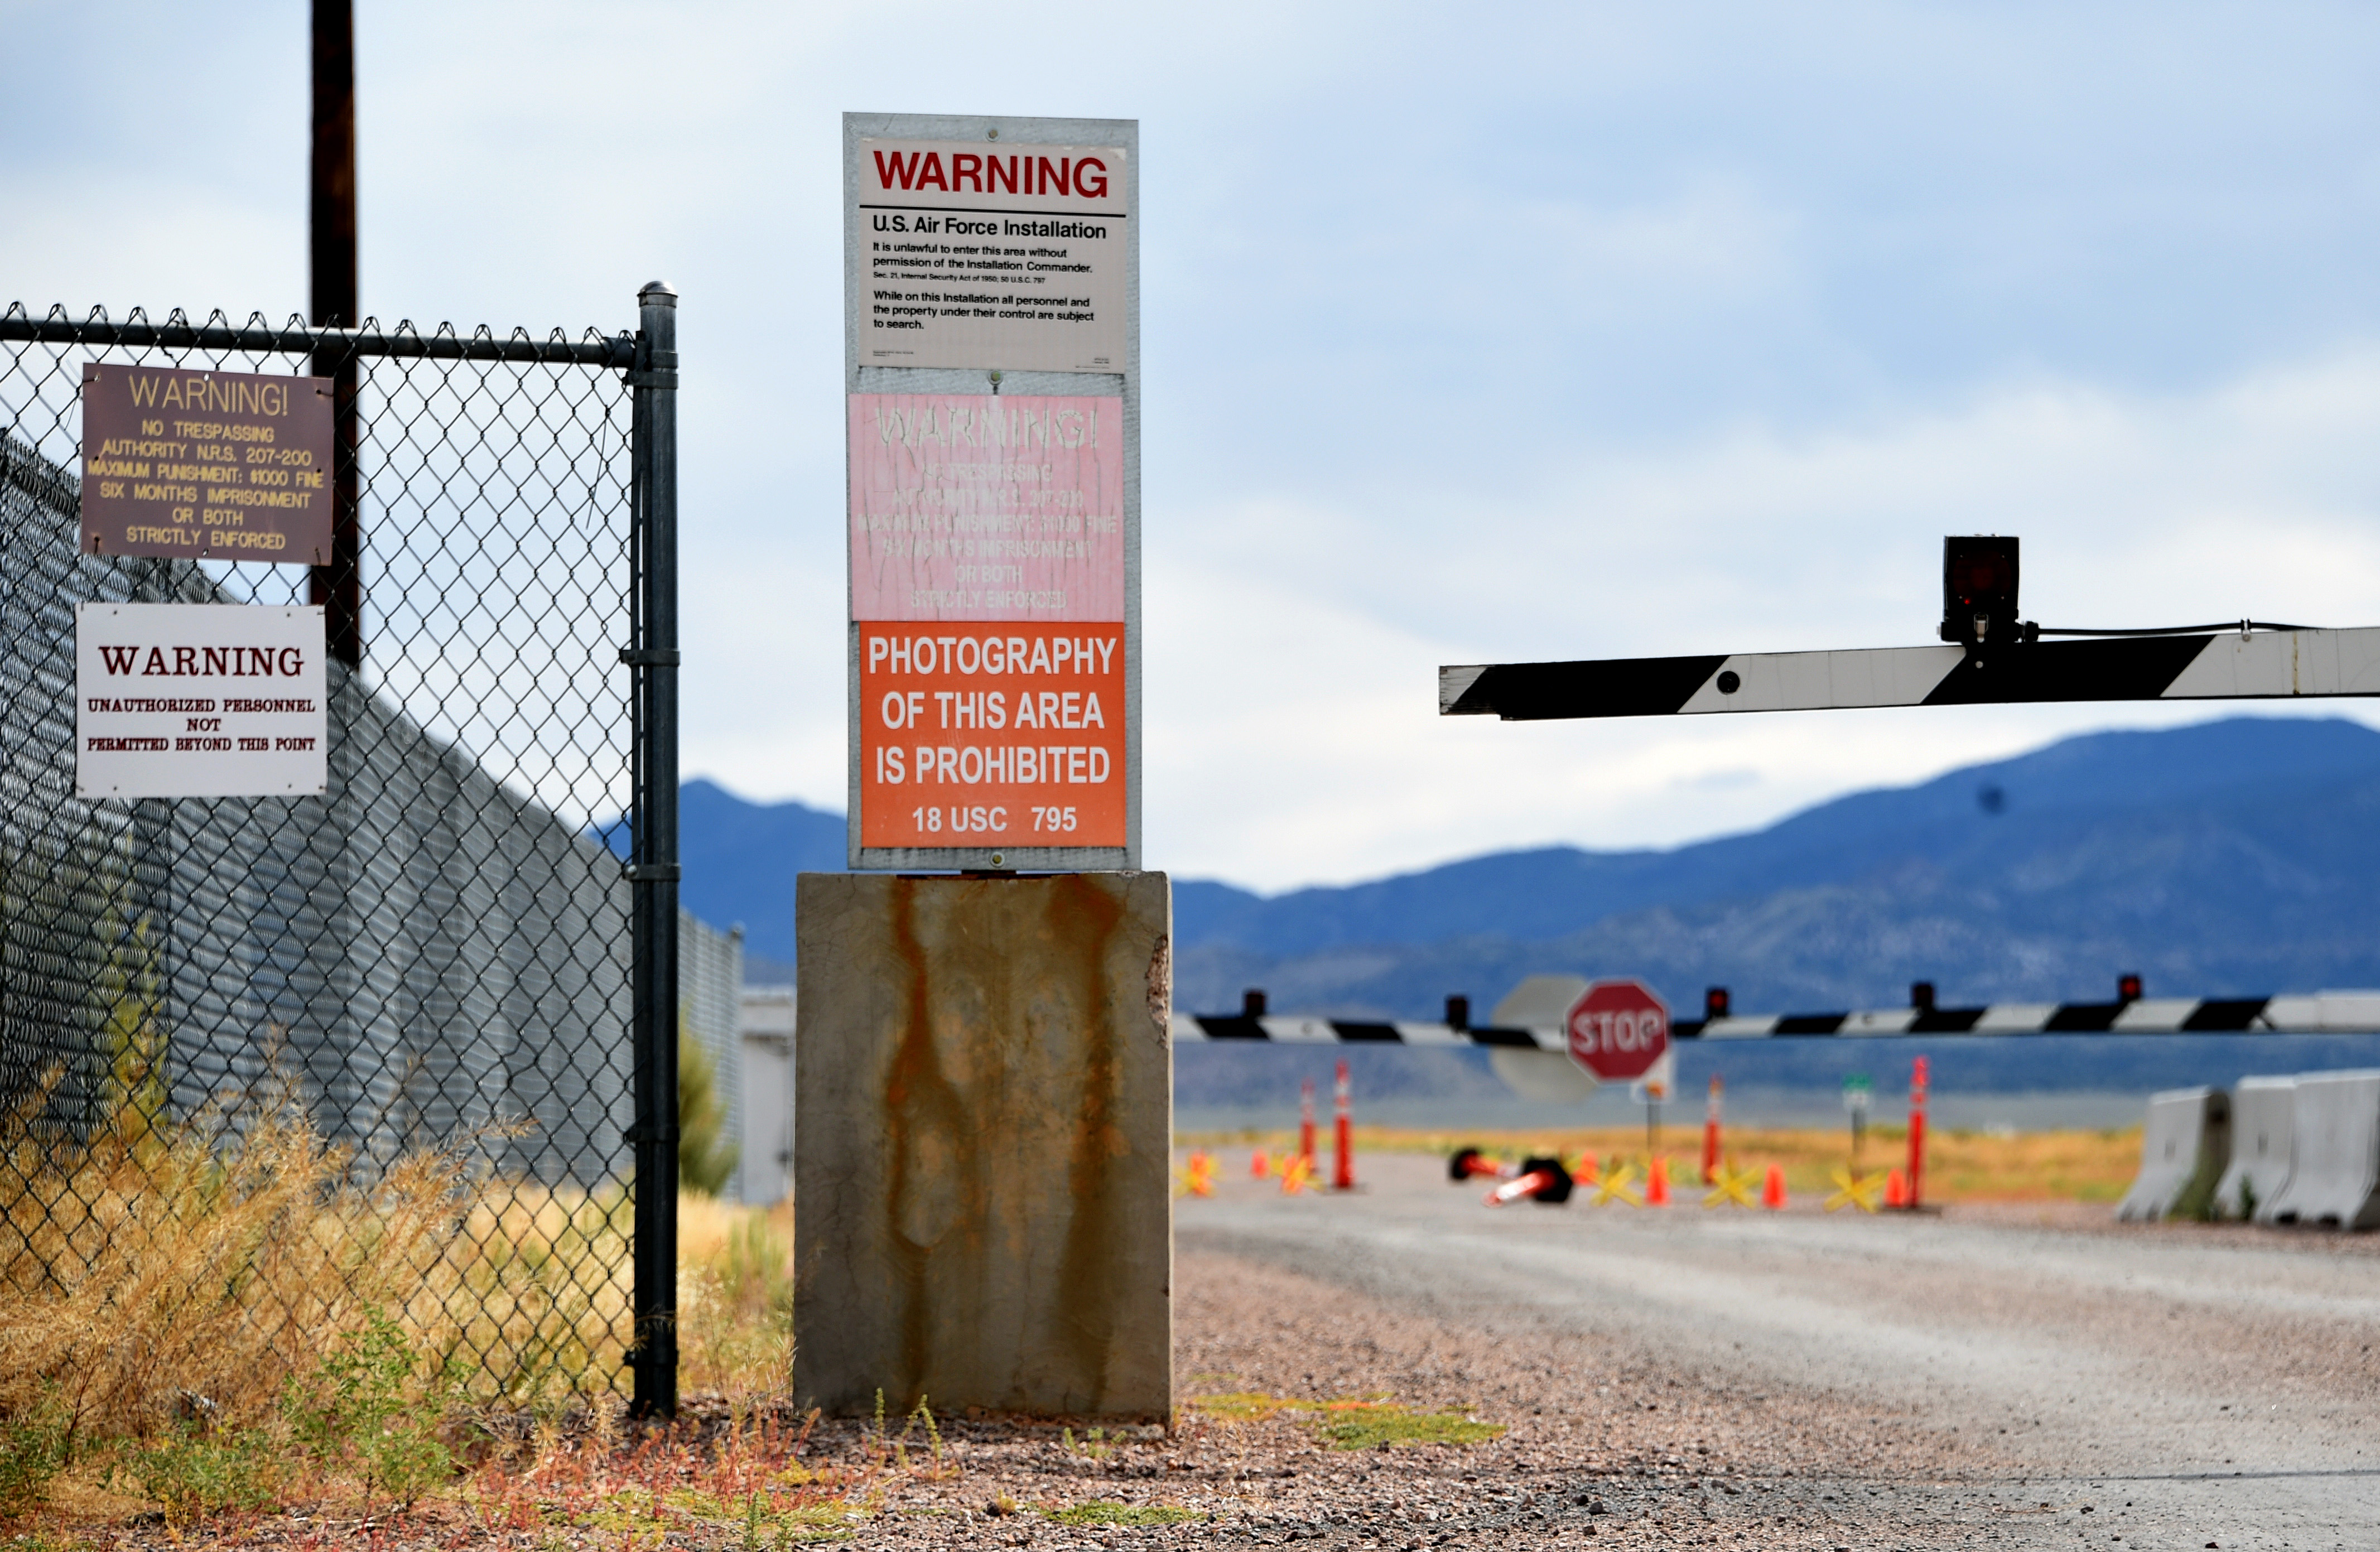 IT BEGINS: A Dutch YouTuber Has Been Arrested Near Area 51 After Trying To See Them Aliens